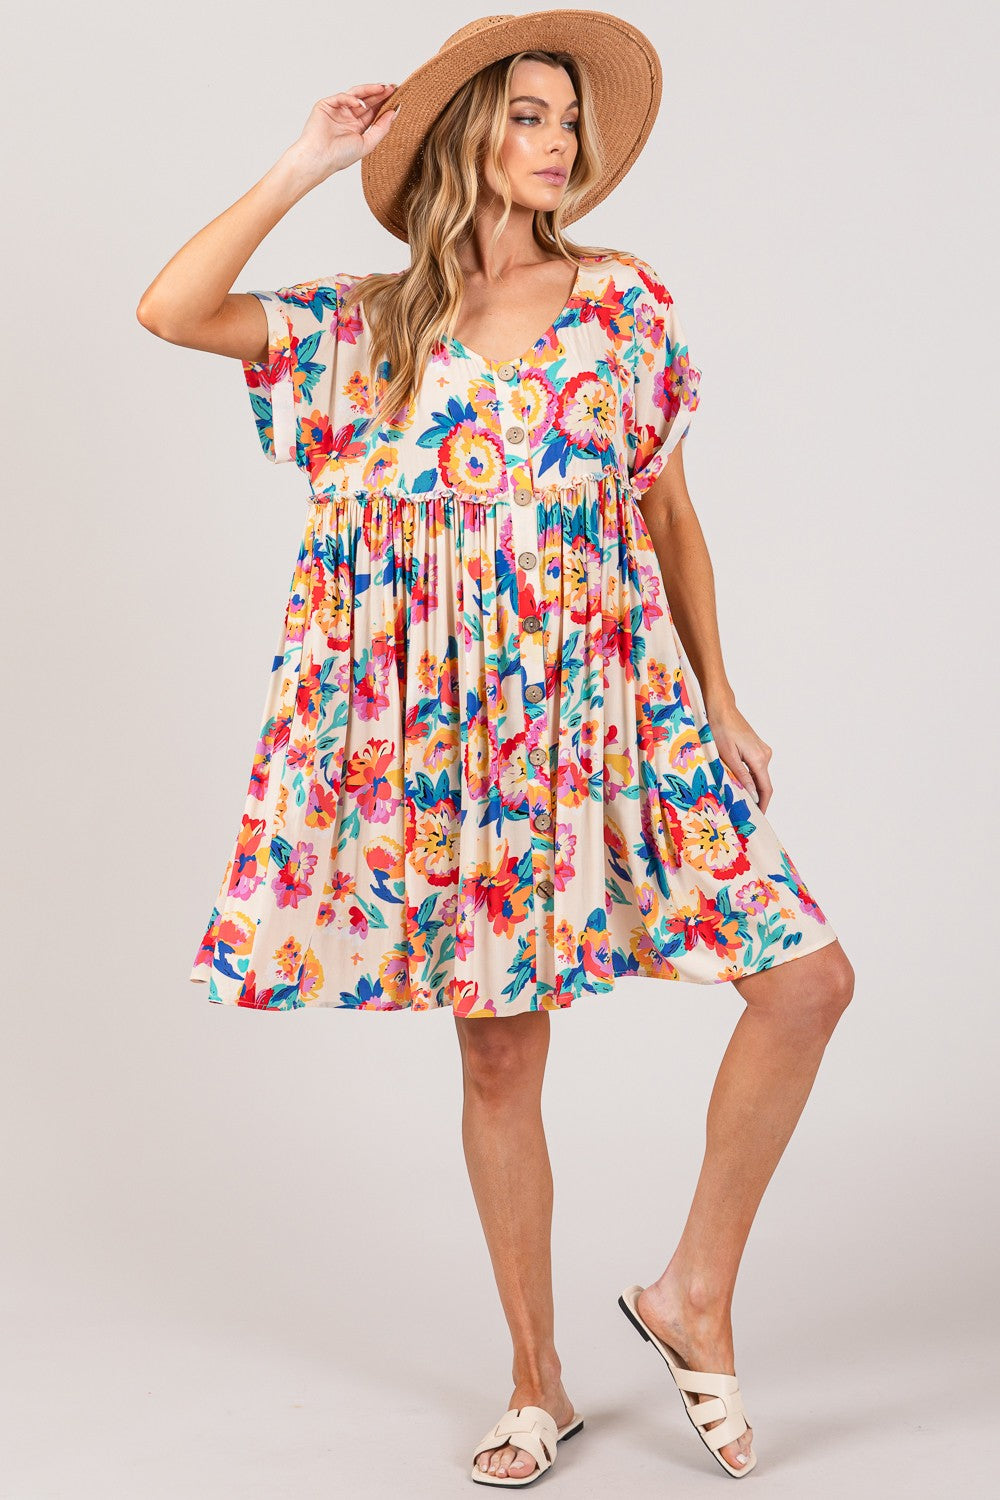 The Floral Button-Down Short Sleeve Dress